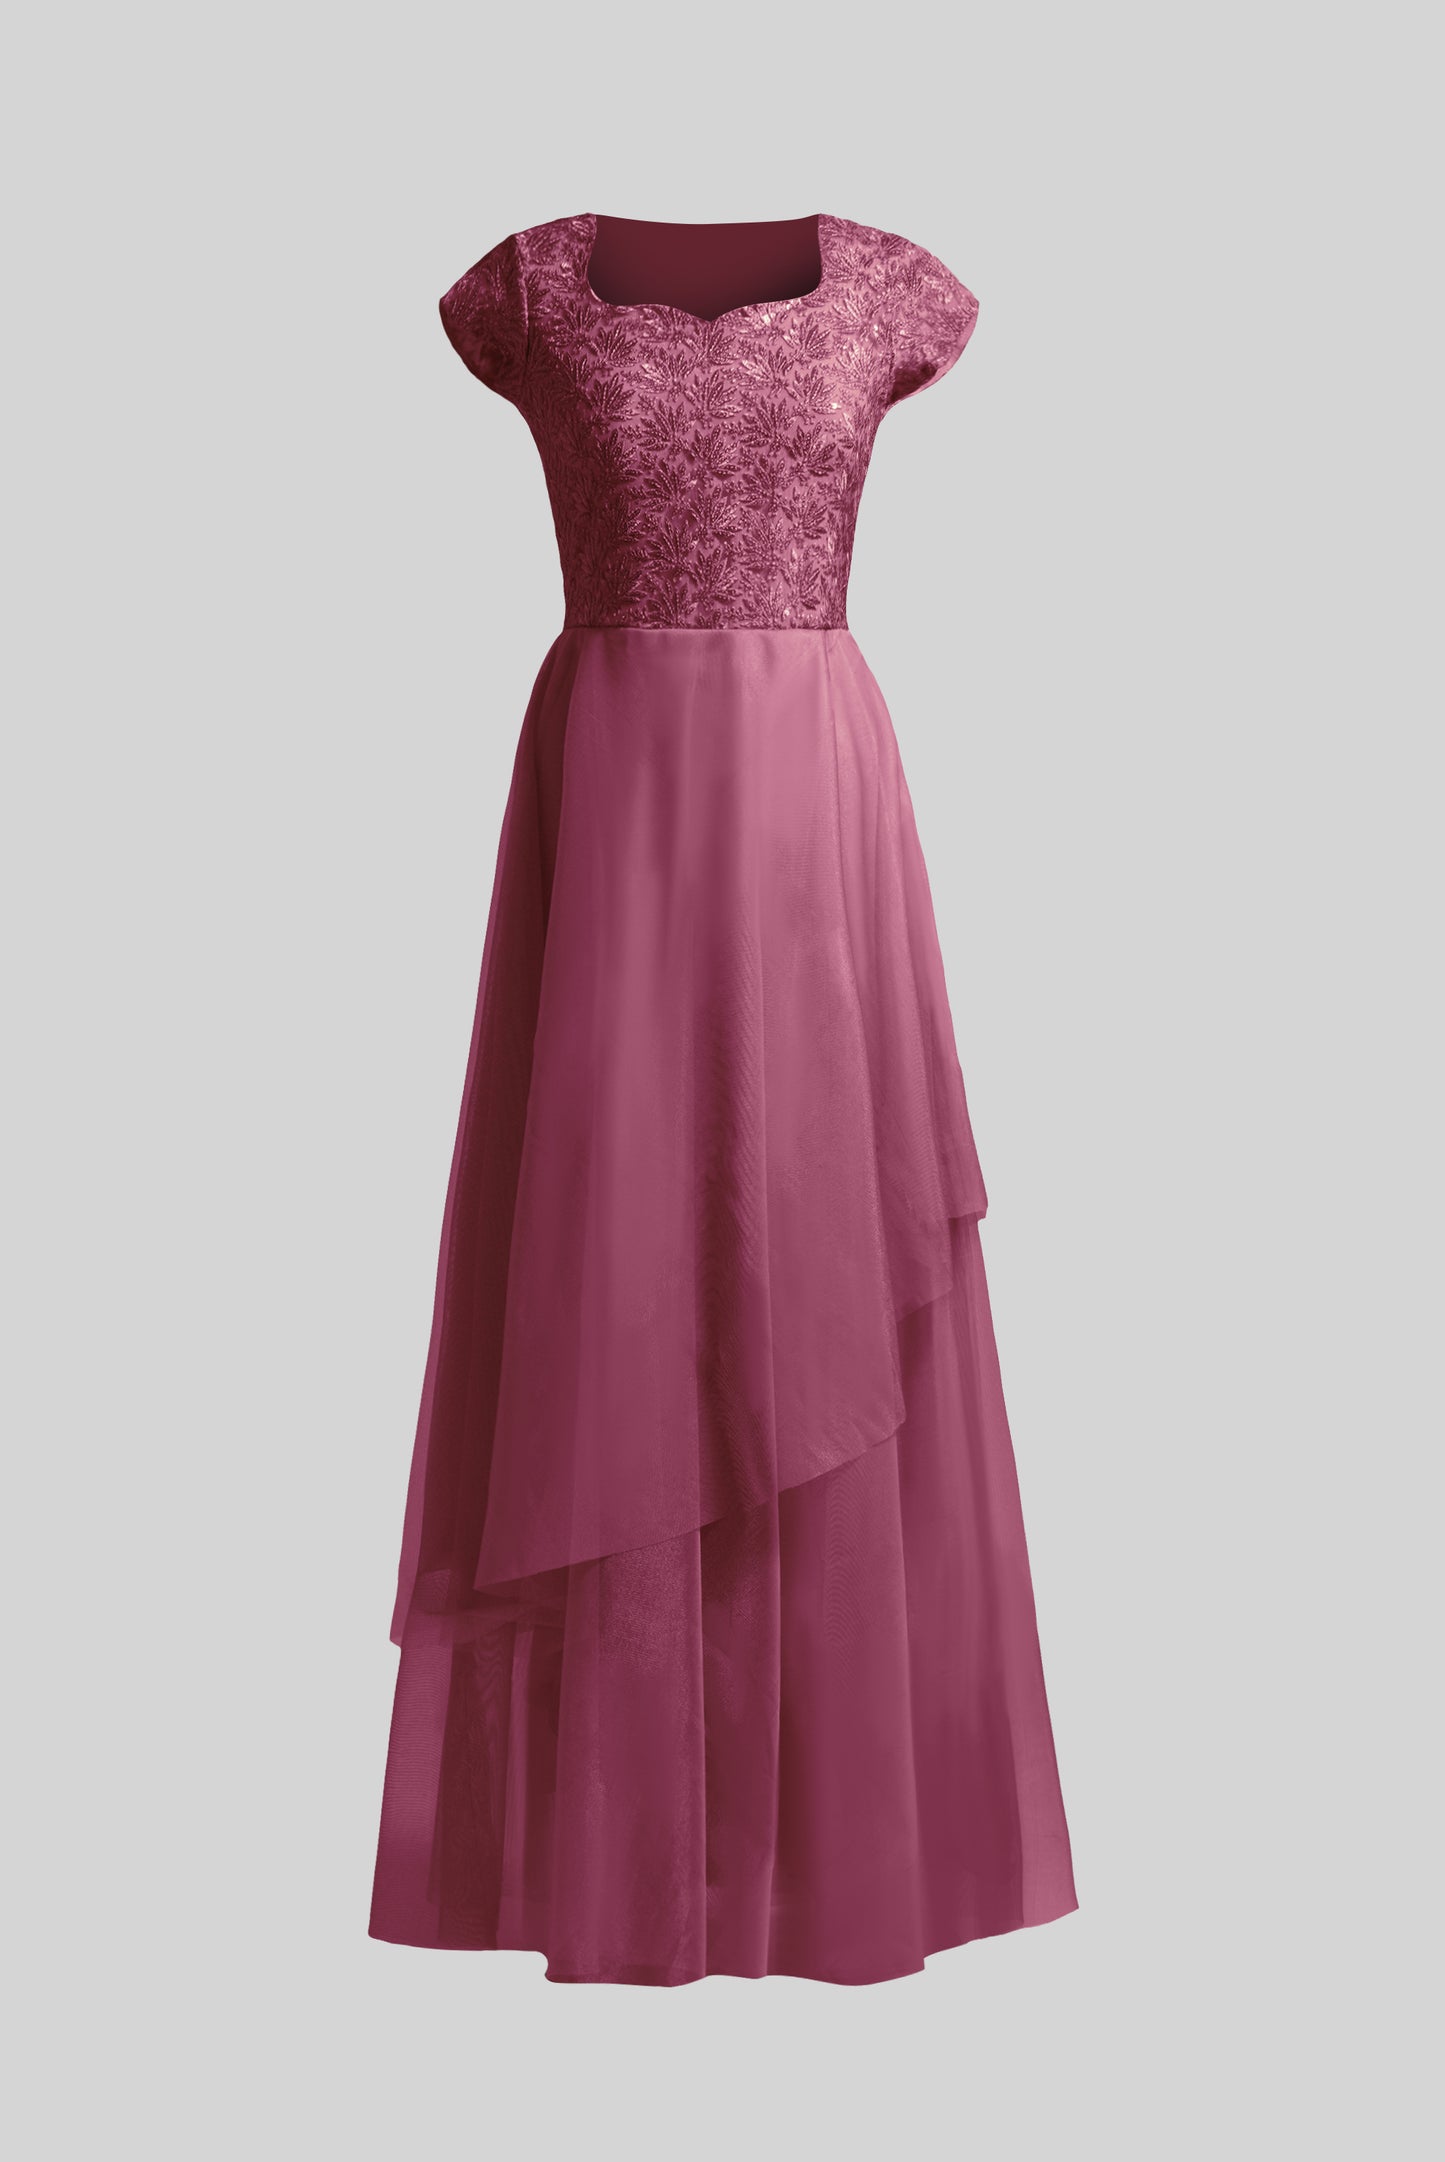 ZIA220 Dusky Pink Asymmetric Netted Gown